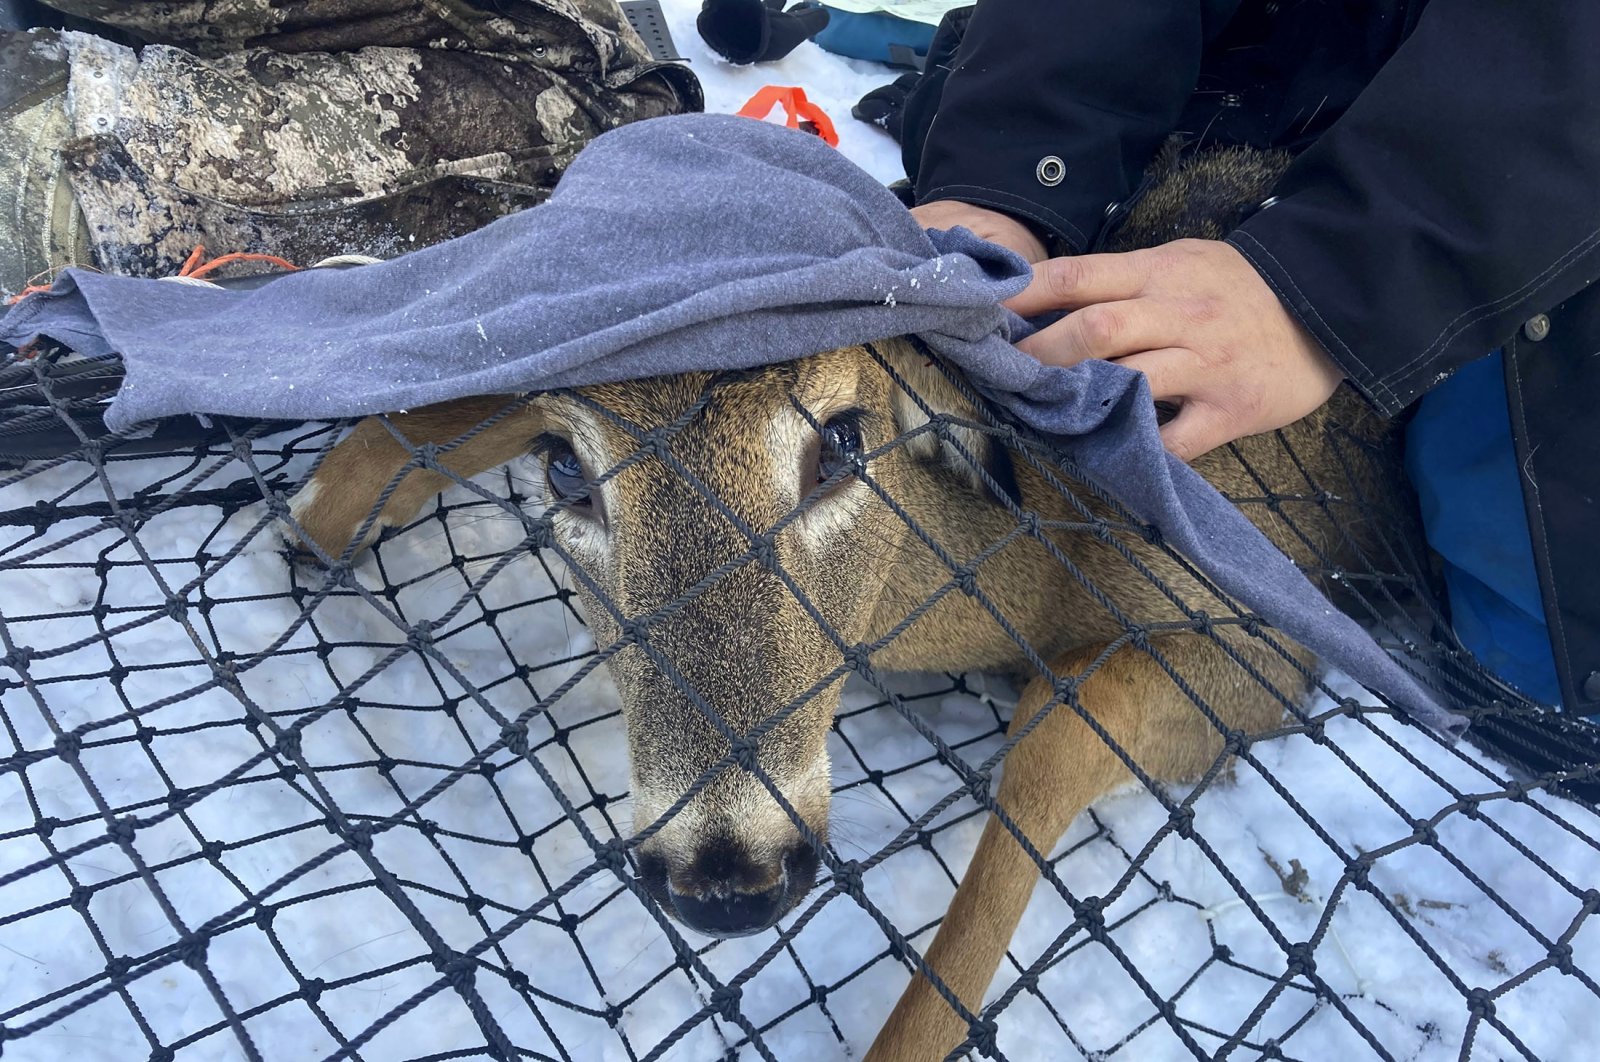 A young buck peaks out from under a blanket while in a Clover deer trap, in Grand Portage, Minnesota, U.S., March 2, 2022. (AP Photo)